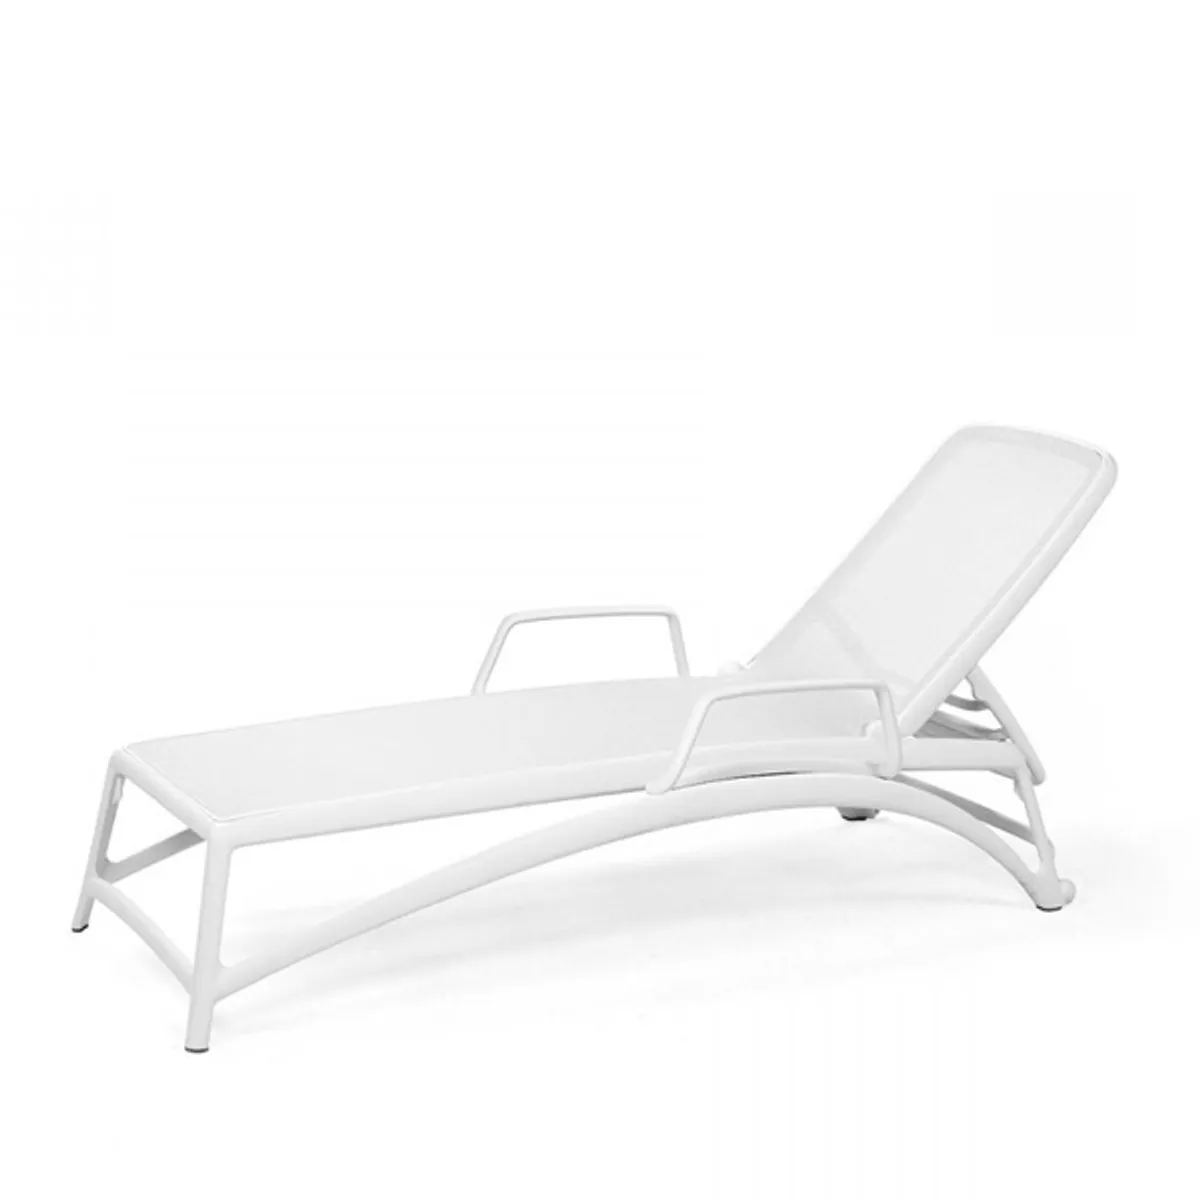 Atlantico lounger with arms Inside Out Contracts4